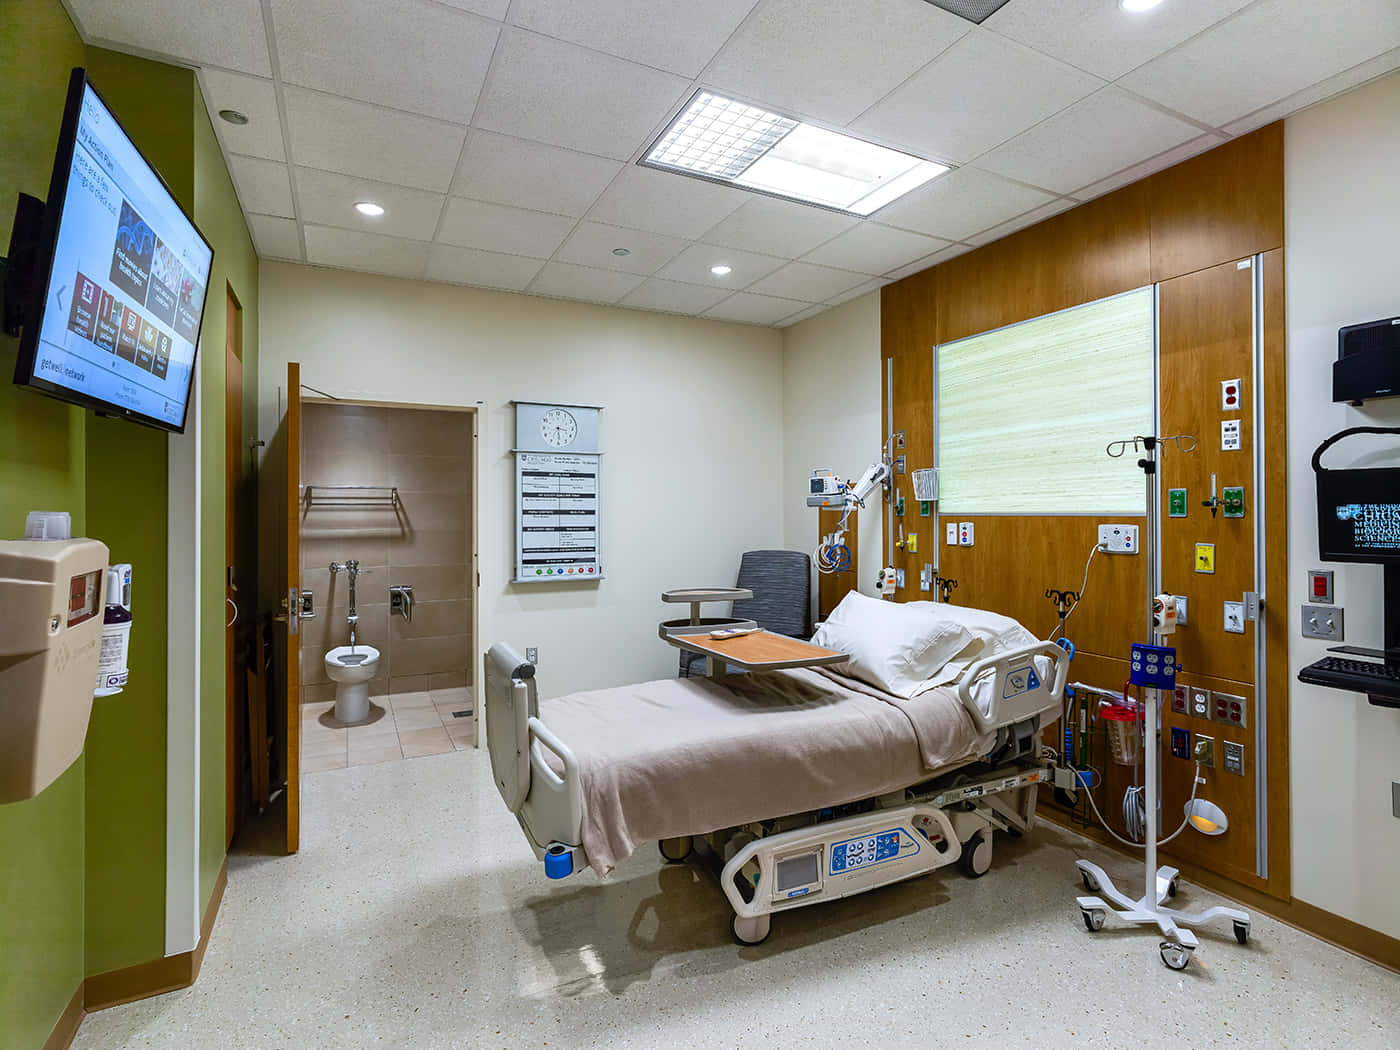 A Hospital Room With A Bed And Television